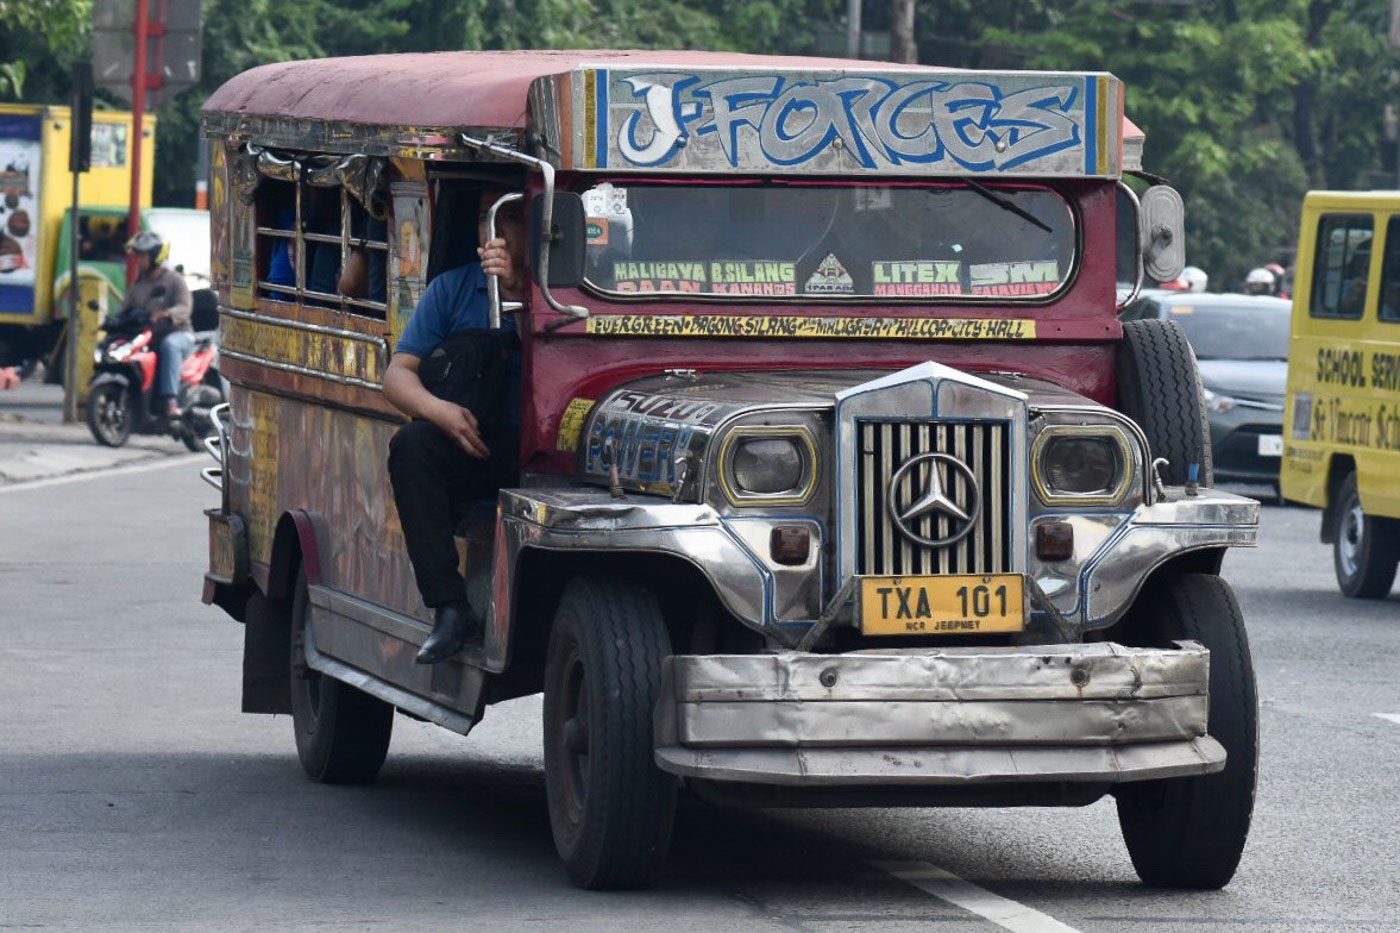 Gov’t to give P5,000 fuel subsidy per jeepney driver in 2018